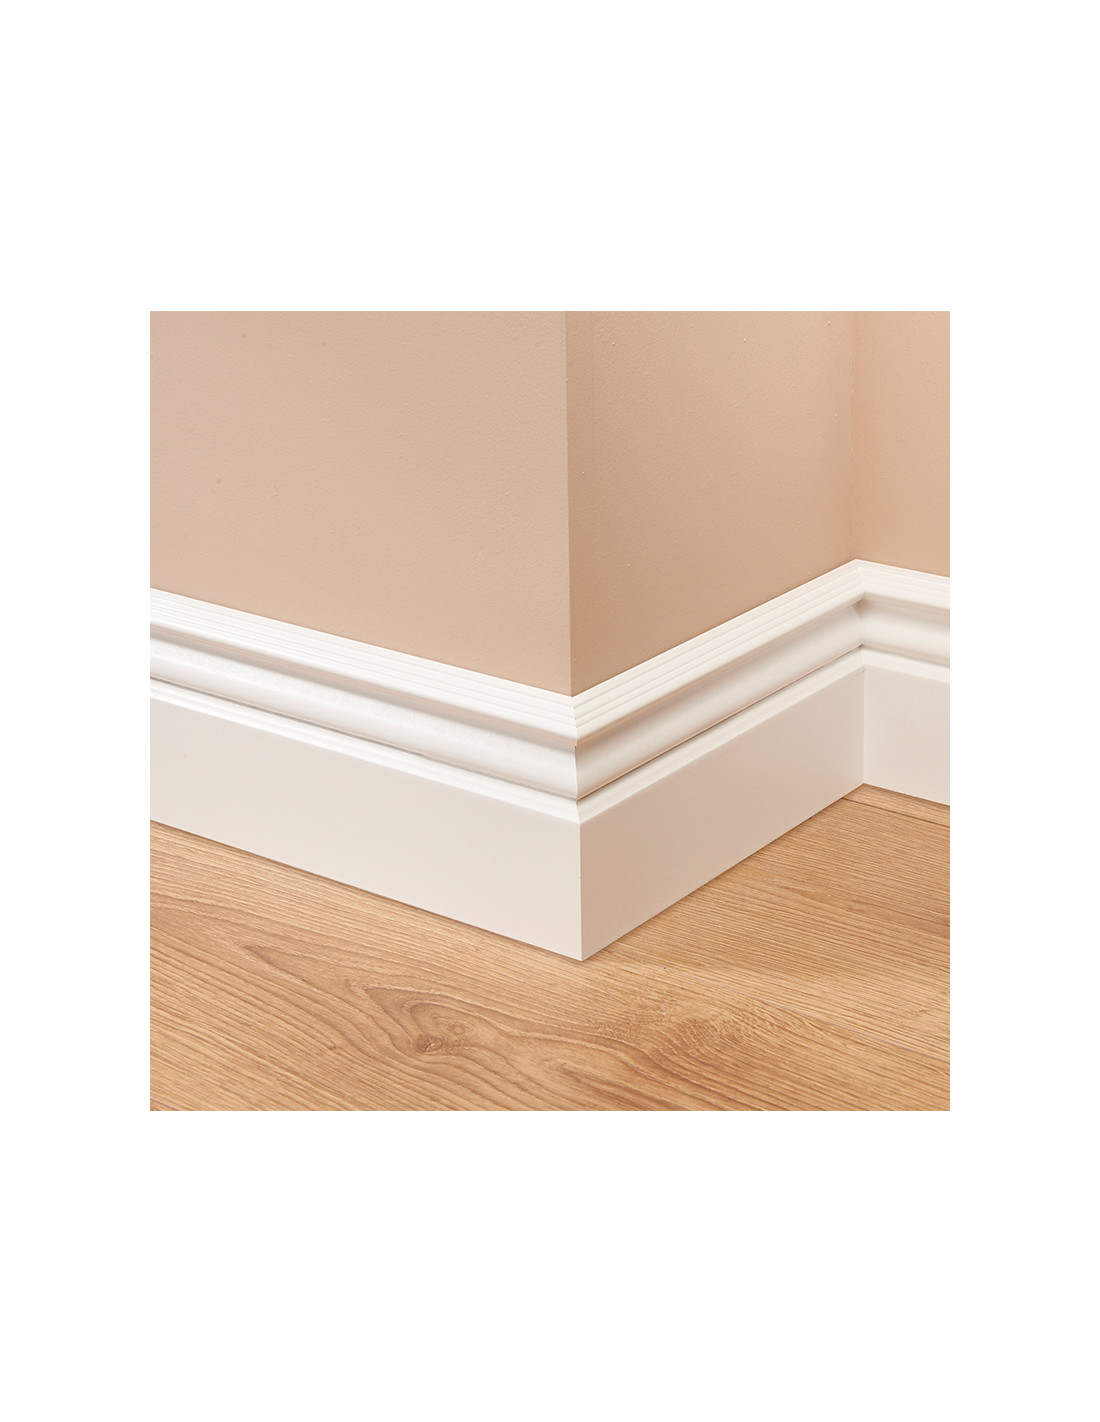 COLONIAL SKIRTINGS & ARCHITRAVES – Moyle Bendale Timber